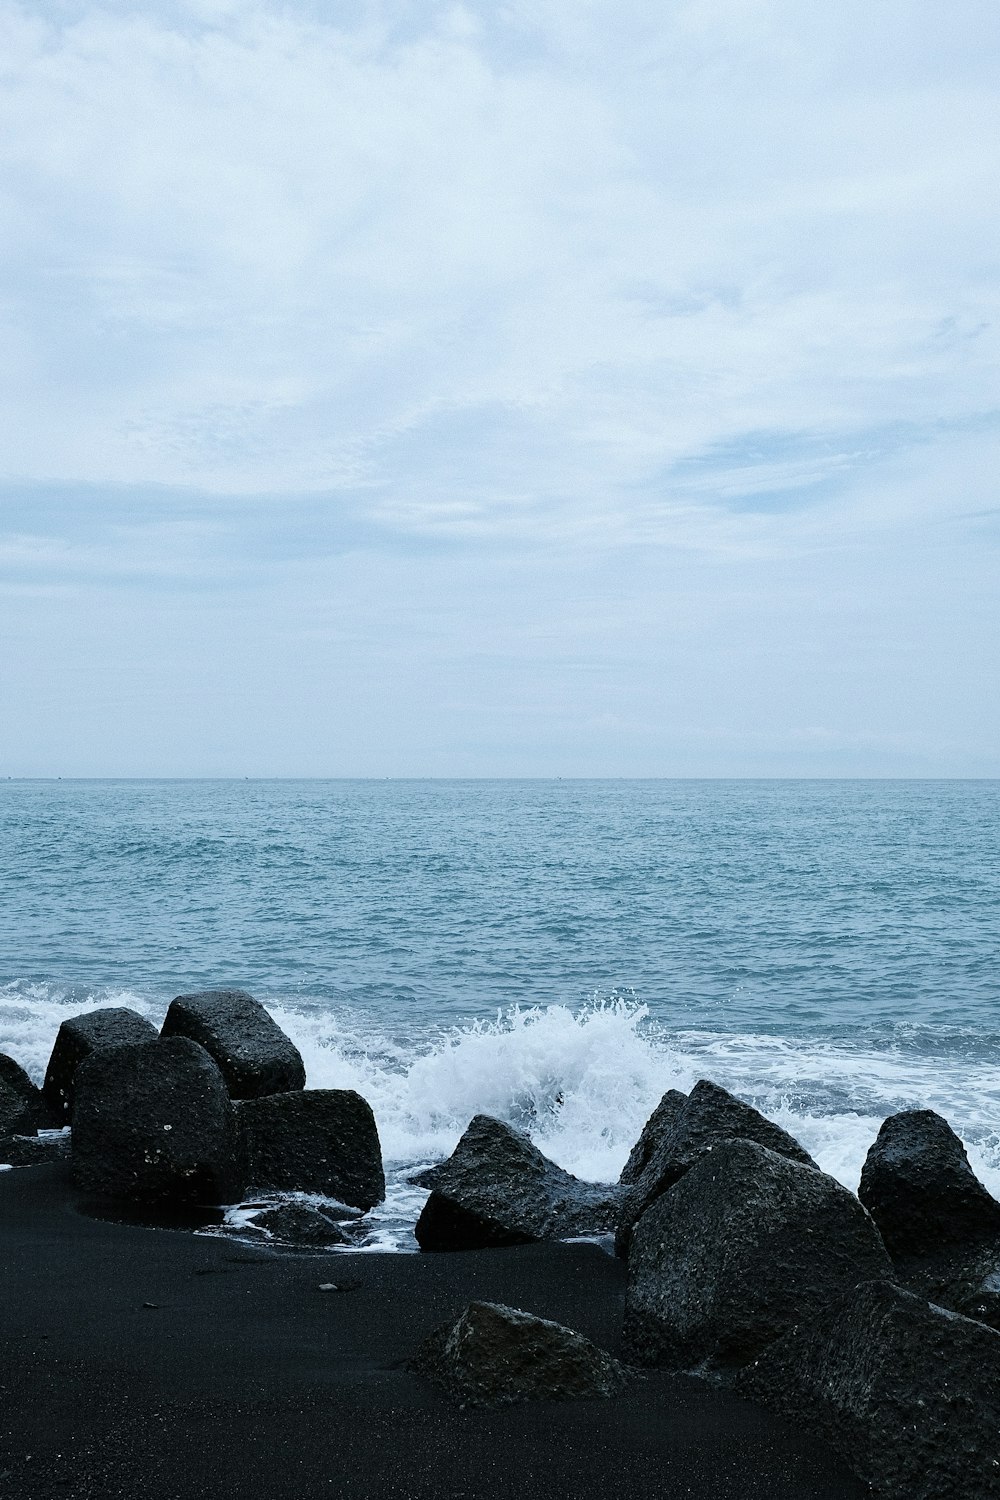 a black sand beach with rocks and a body of water